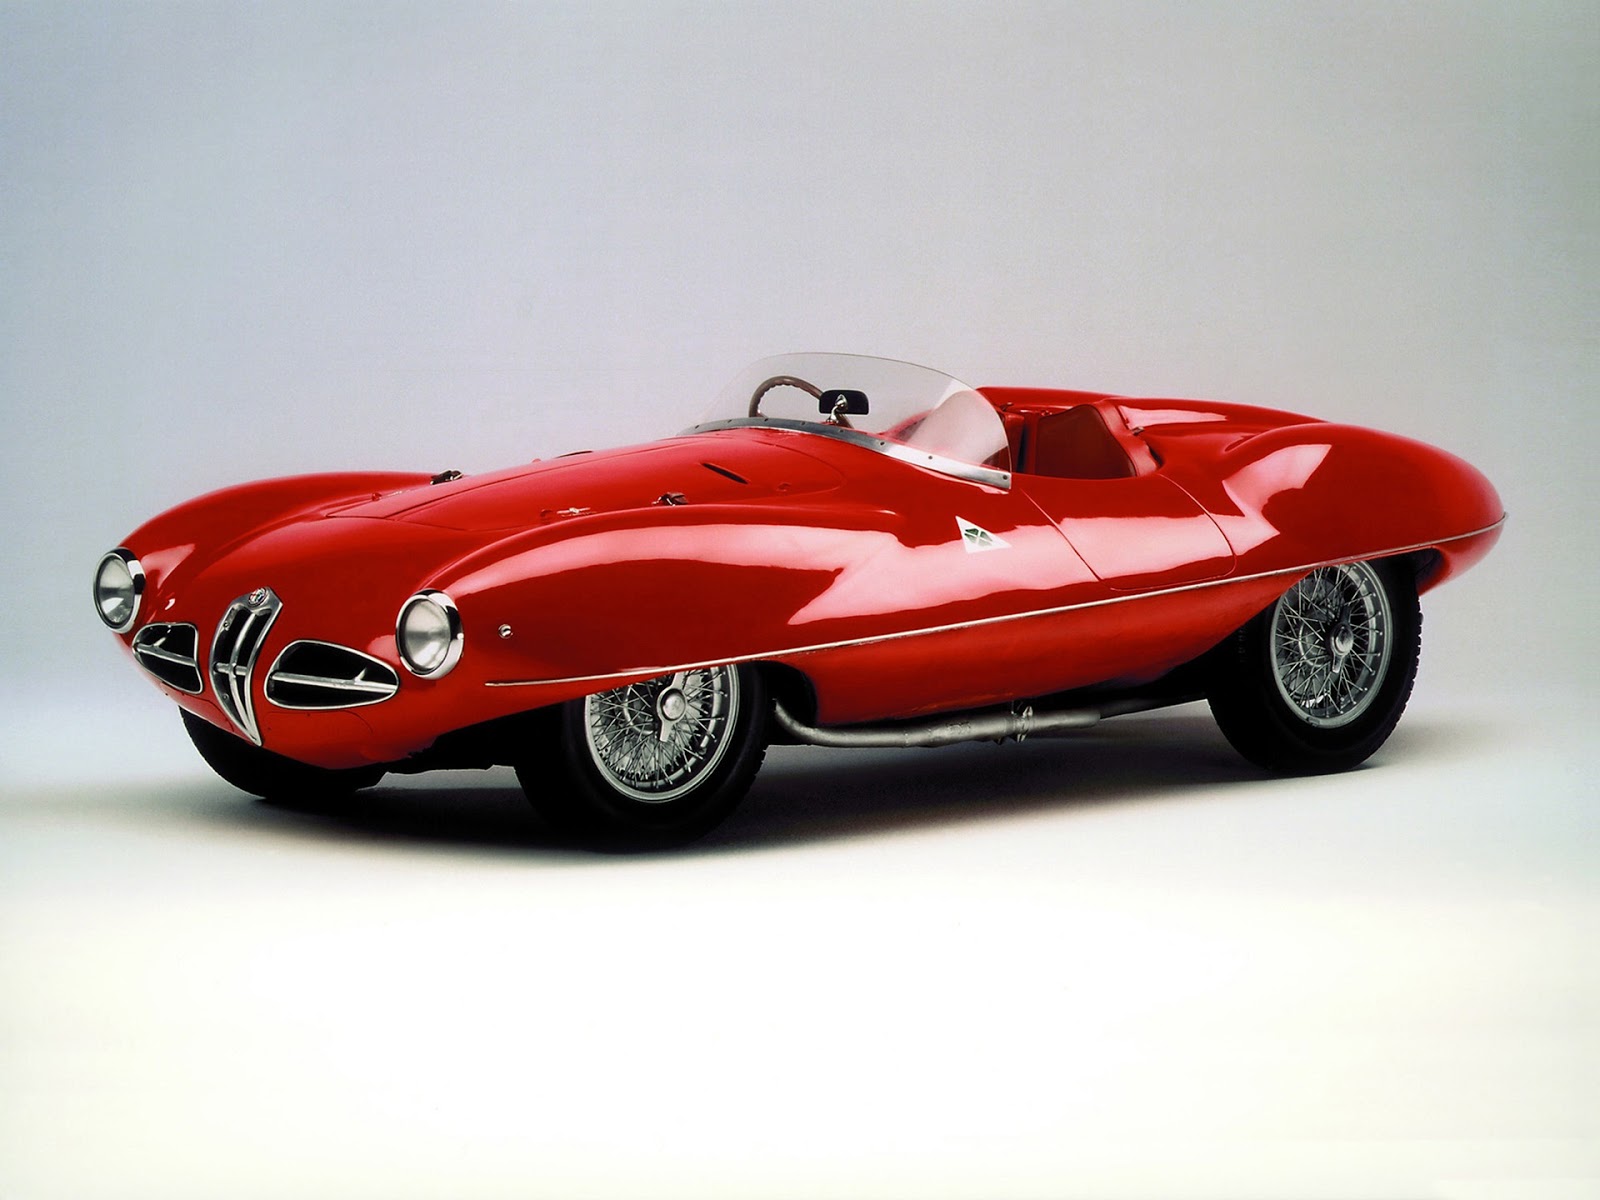 john-crawford: Holy Flying Saucers! It's the Disco Volante